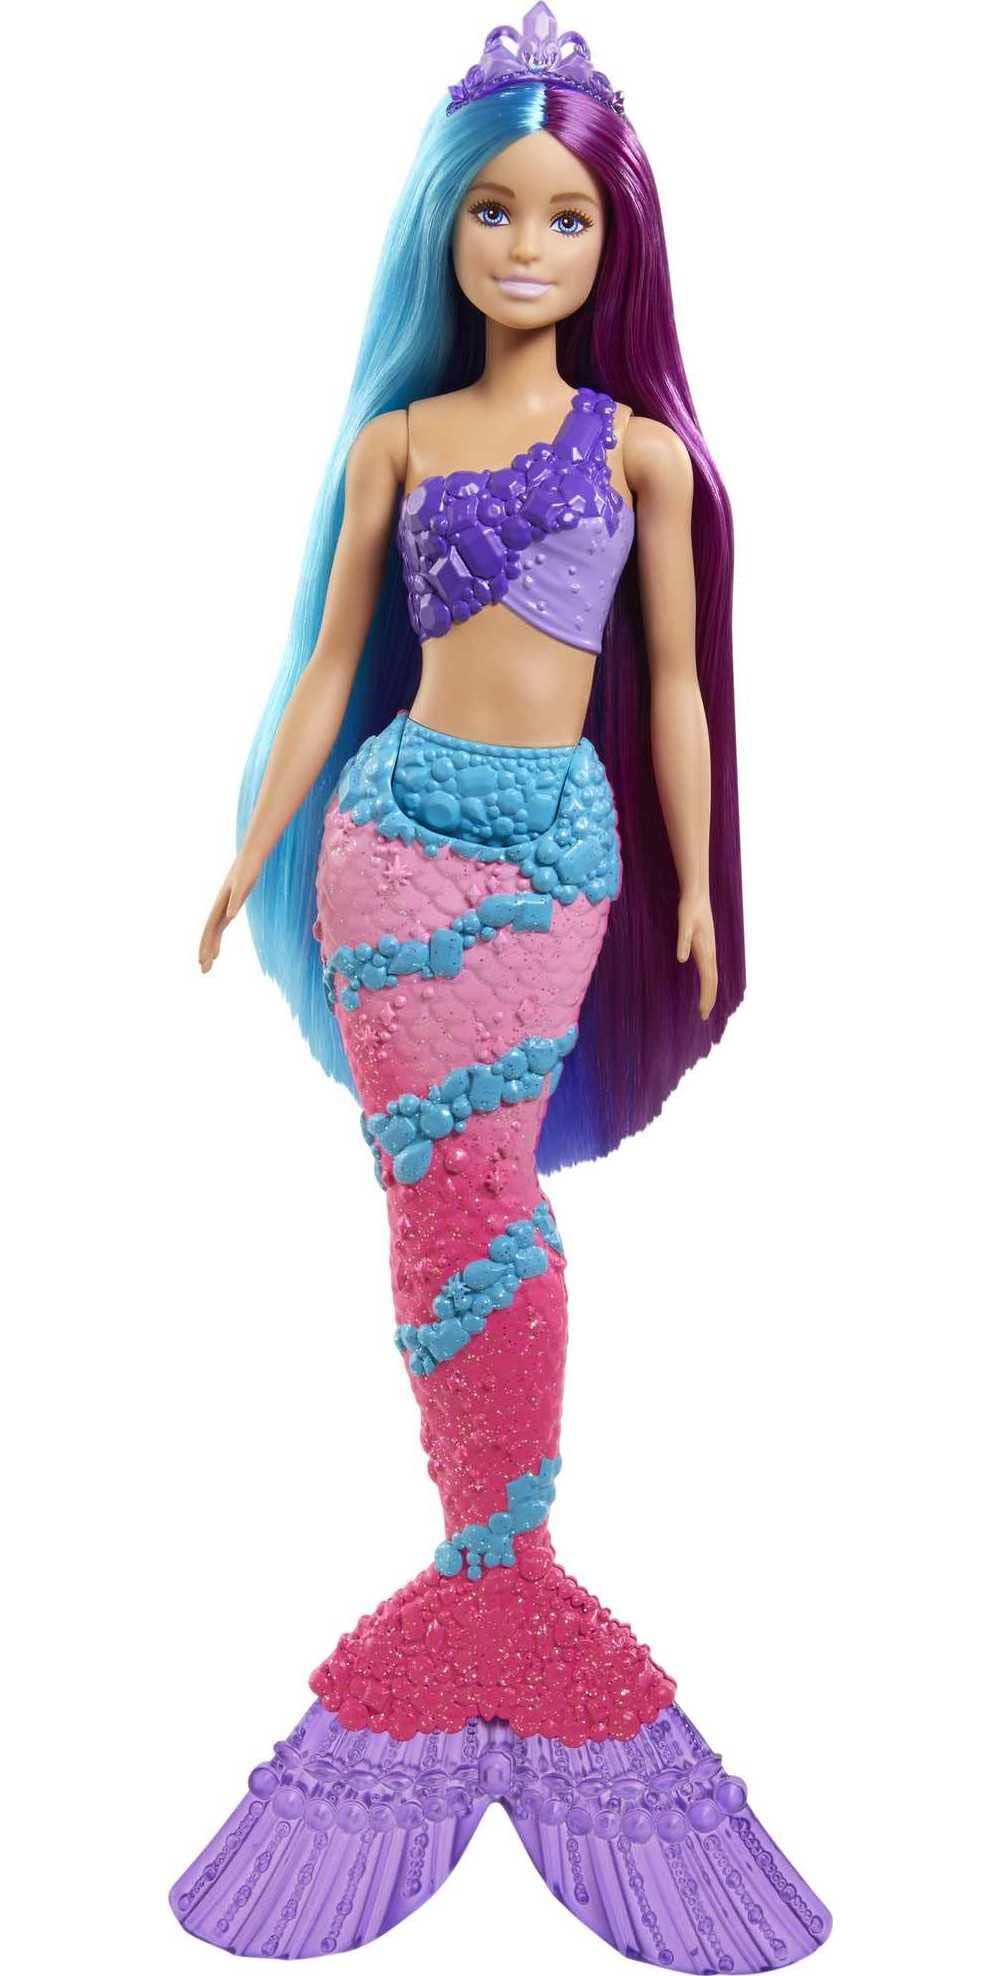 Barbie Dreamtopia Doll, Mermaid Toys, Pink Ombre Tail & Extra-Long Fantasy Hair with Brush, Tiaras & Styling Accessories